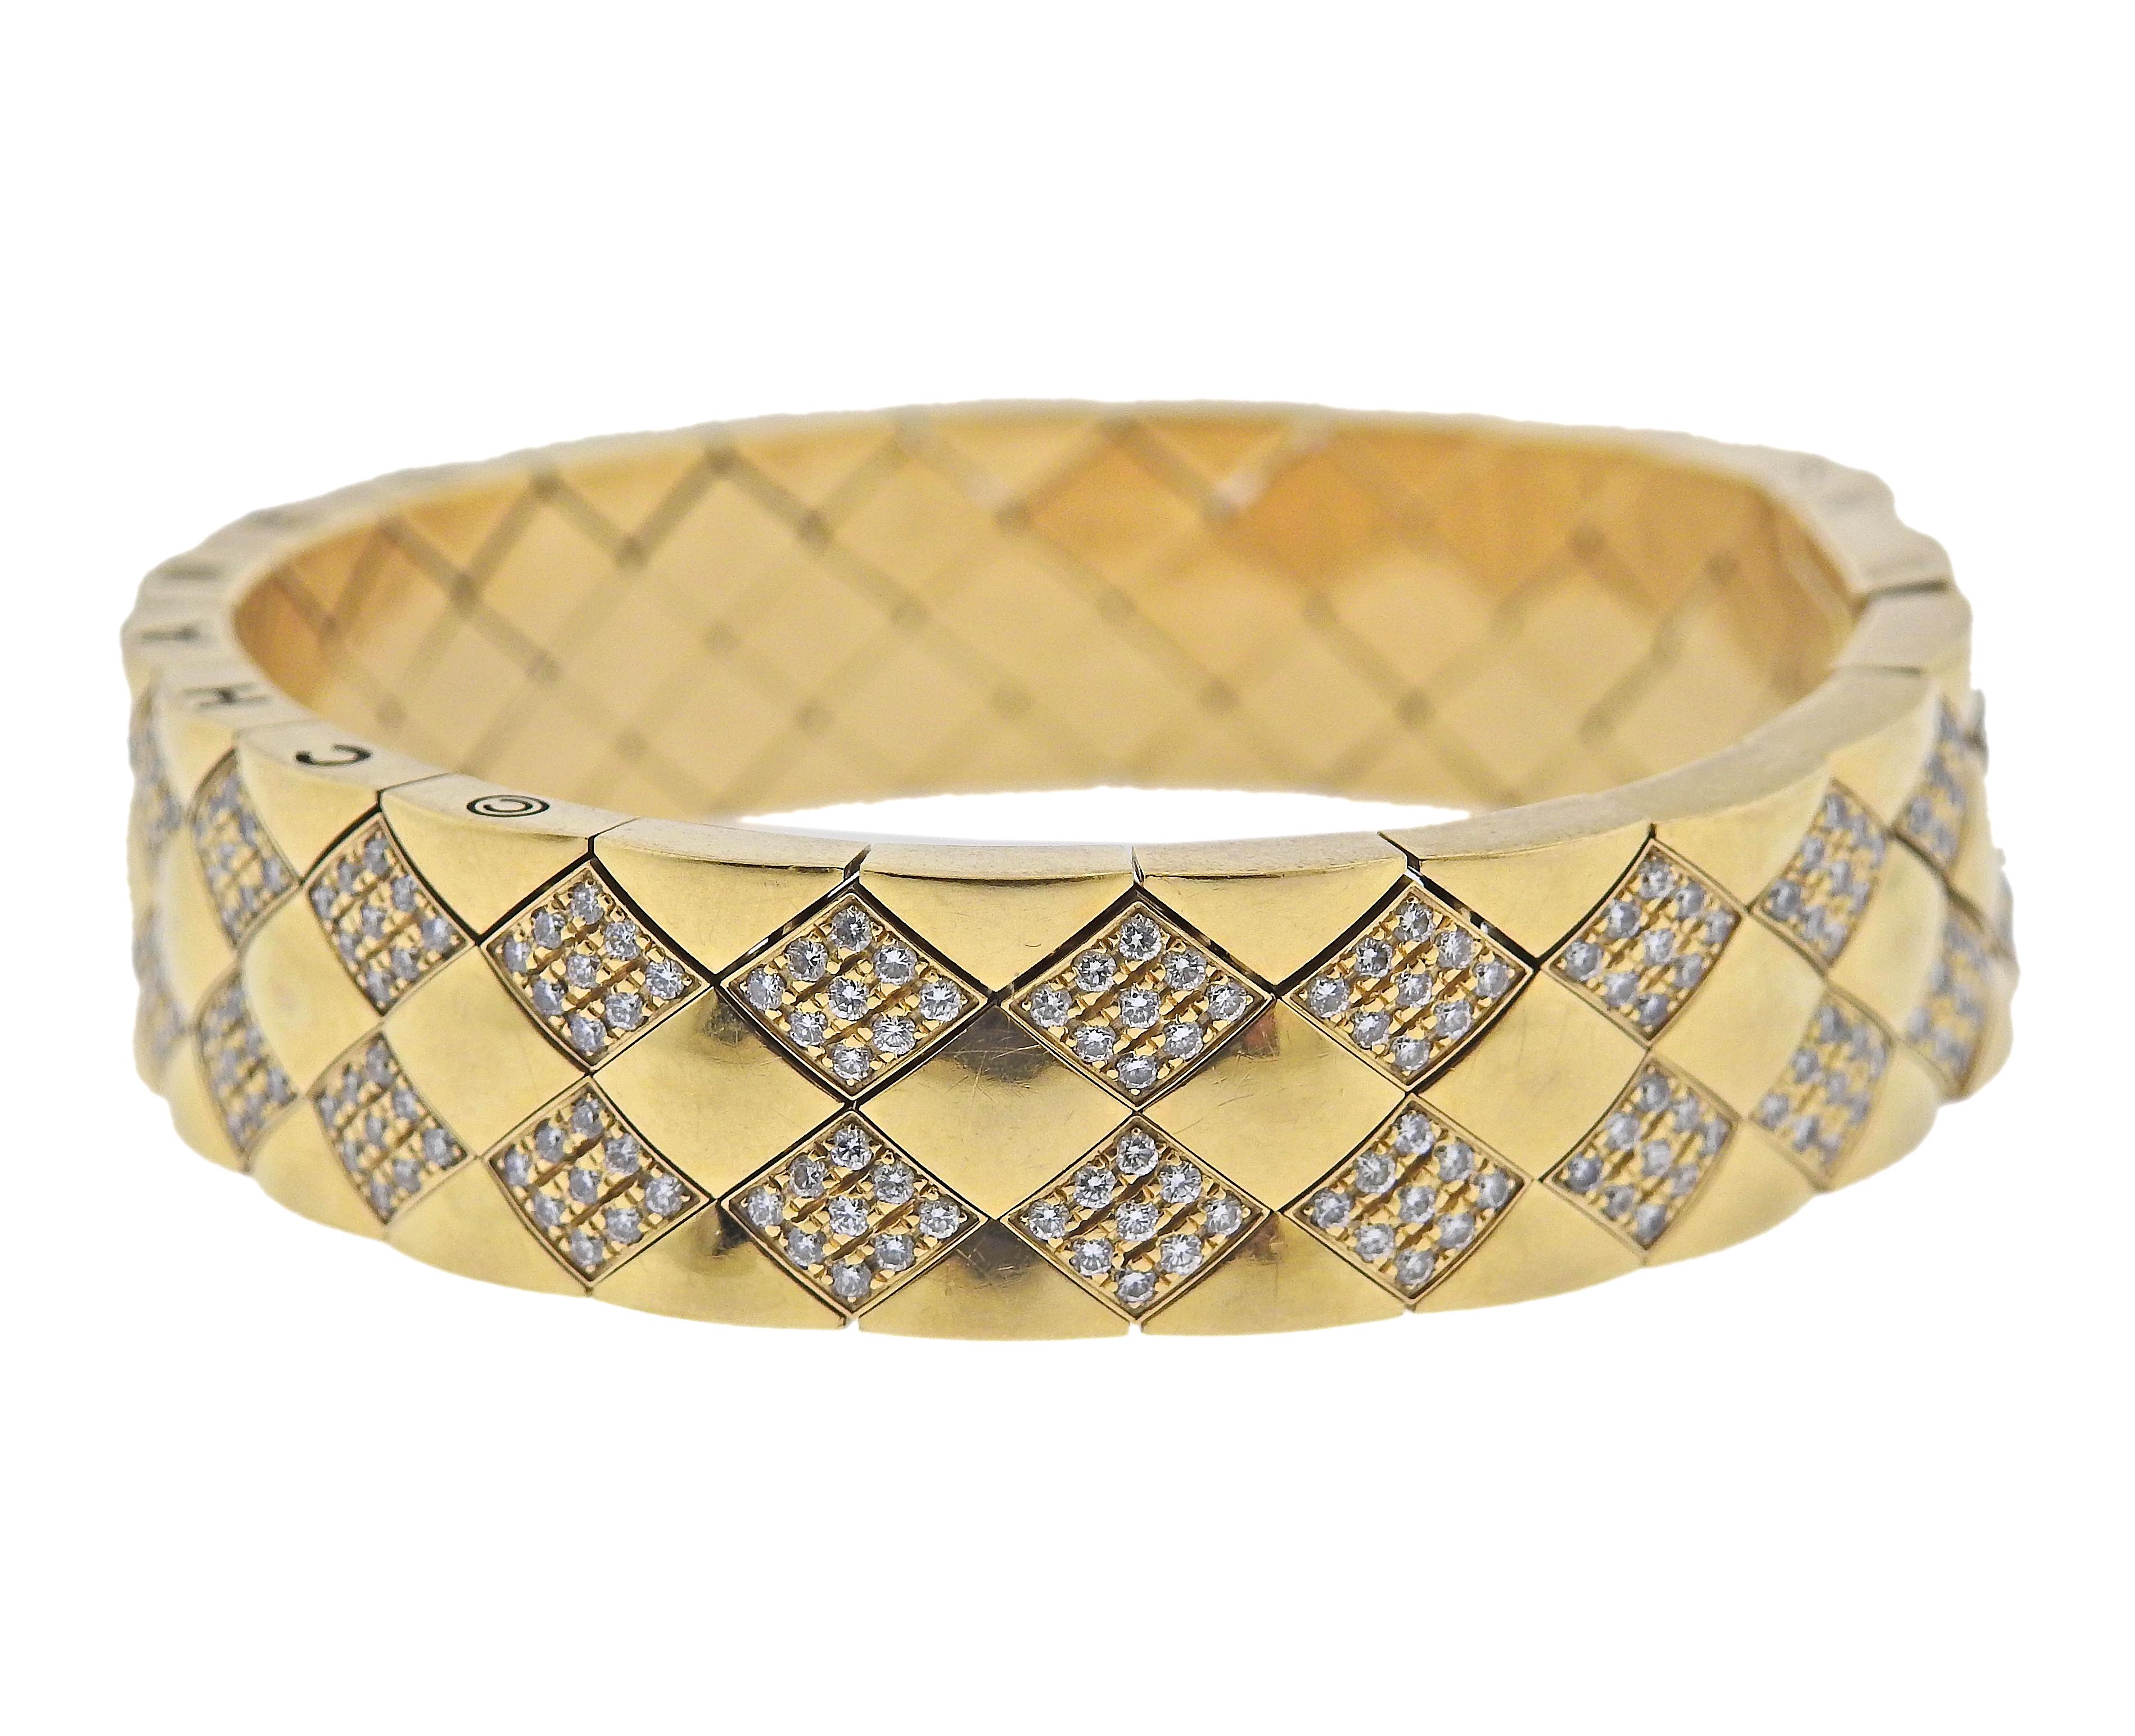 18k yellow gold Coco Crush bracelet by Chanel, with approx. 2.30ctw in diamonds. Bracelet is 6.75